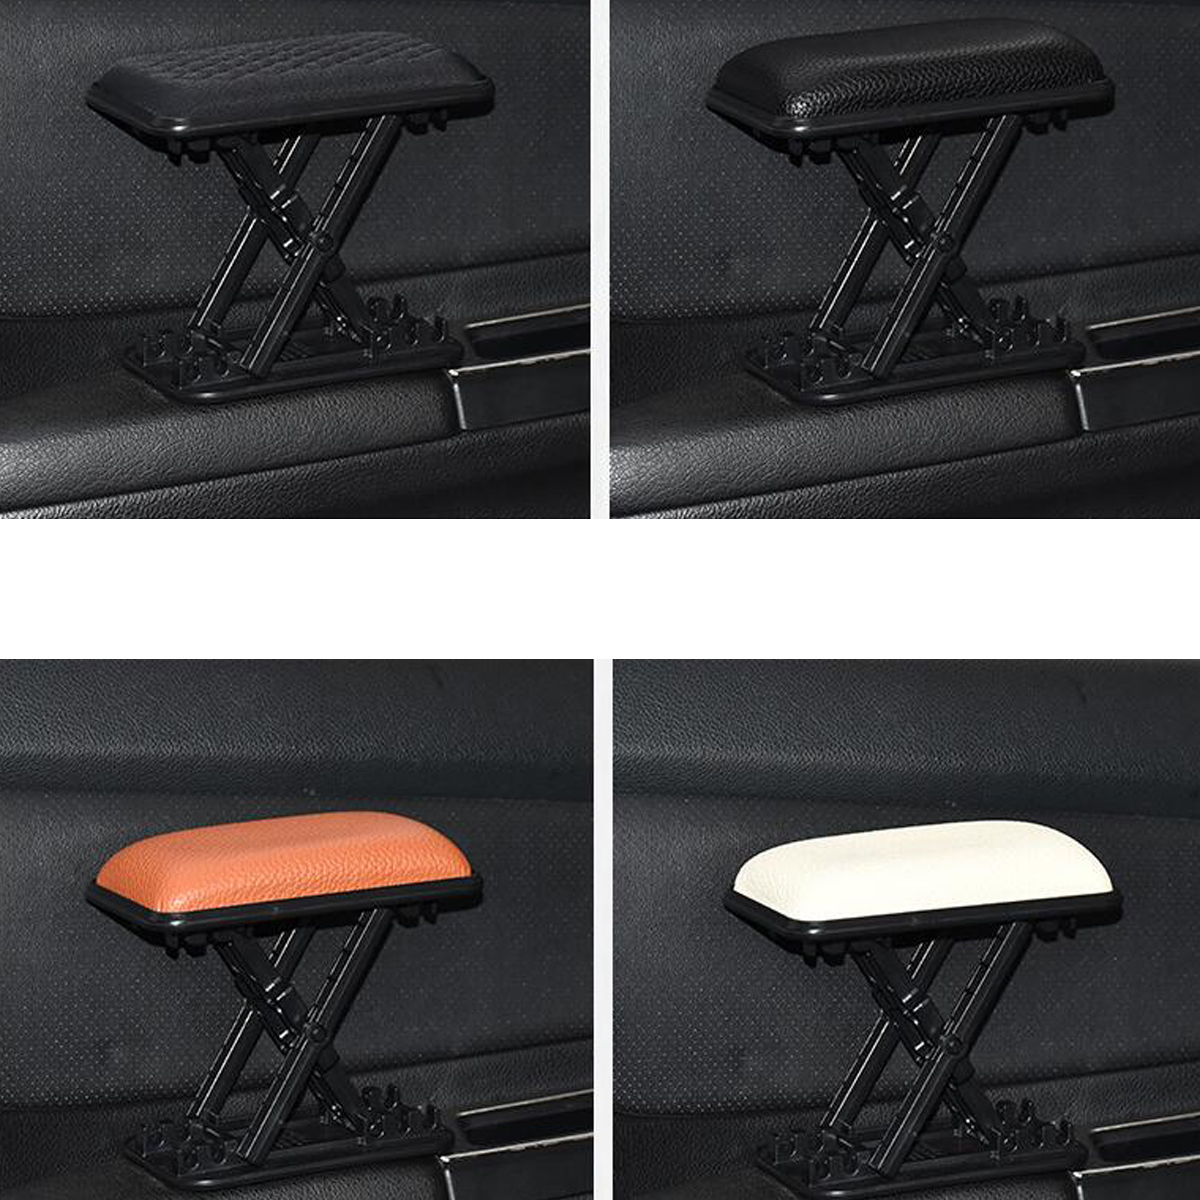 

Universal Car Arm Rest Cushion Rest Pads Support Soft Adjustable Height Elbow